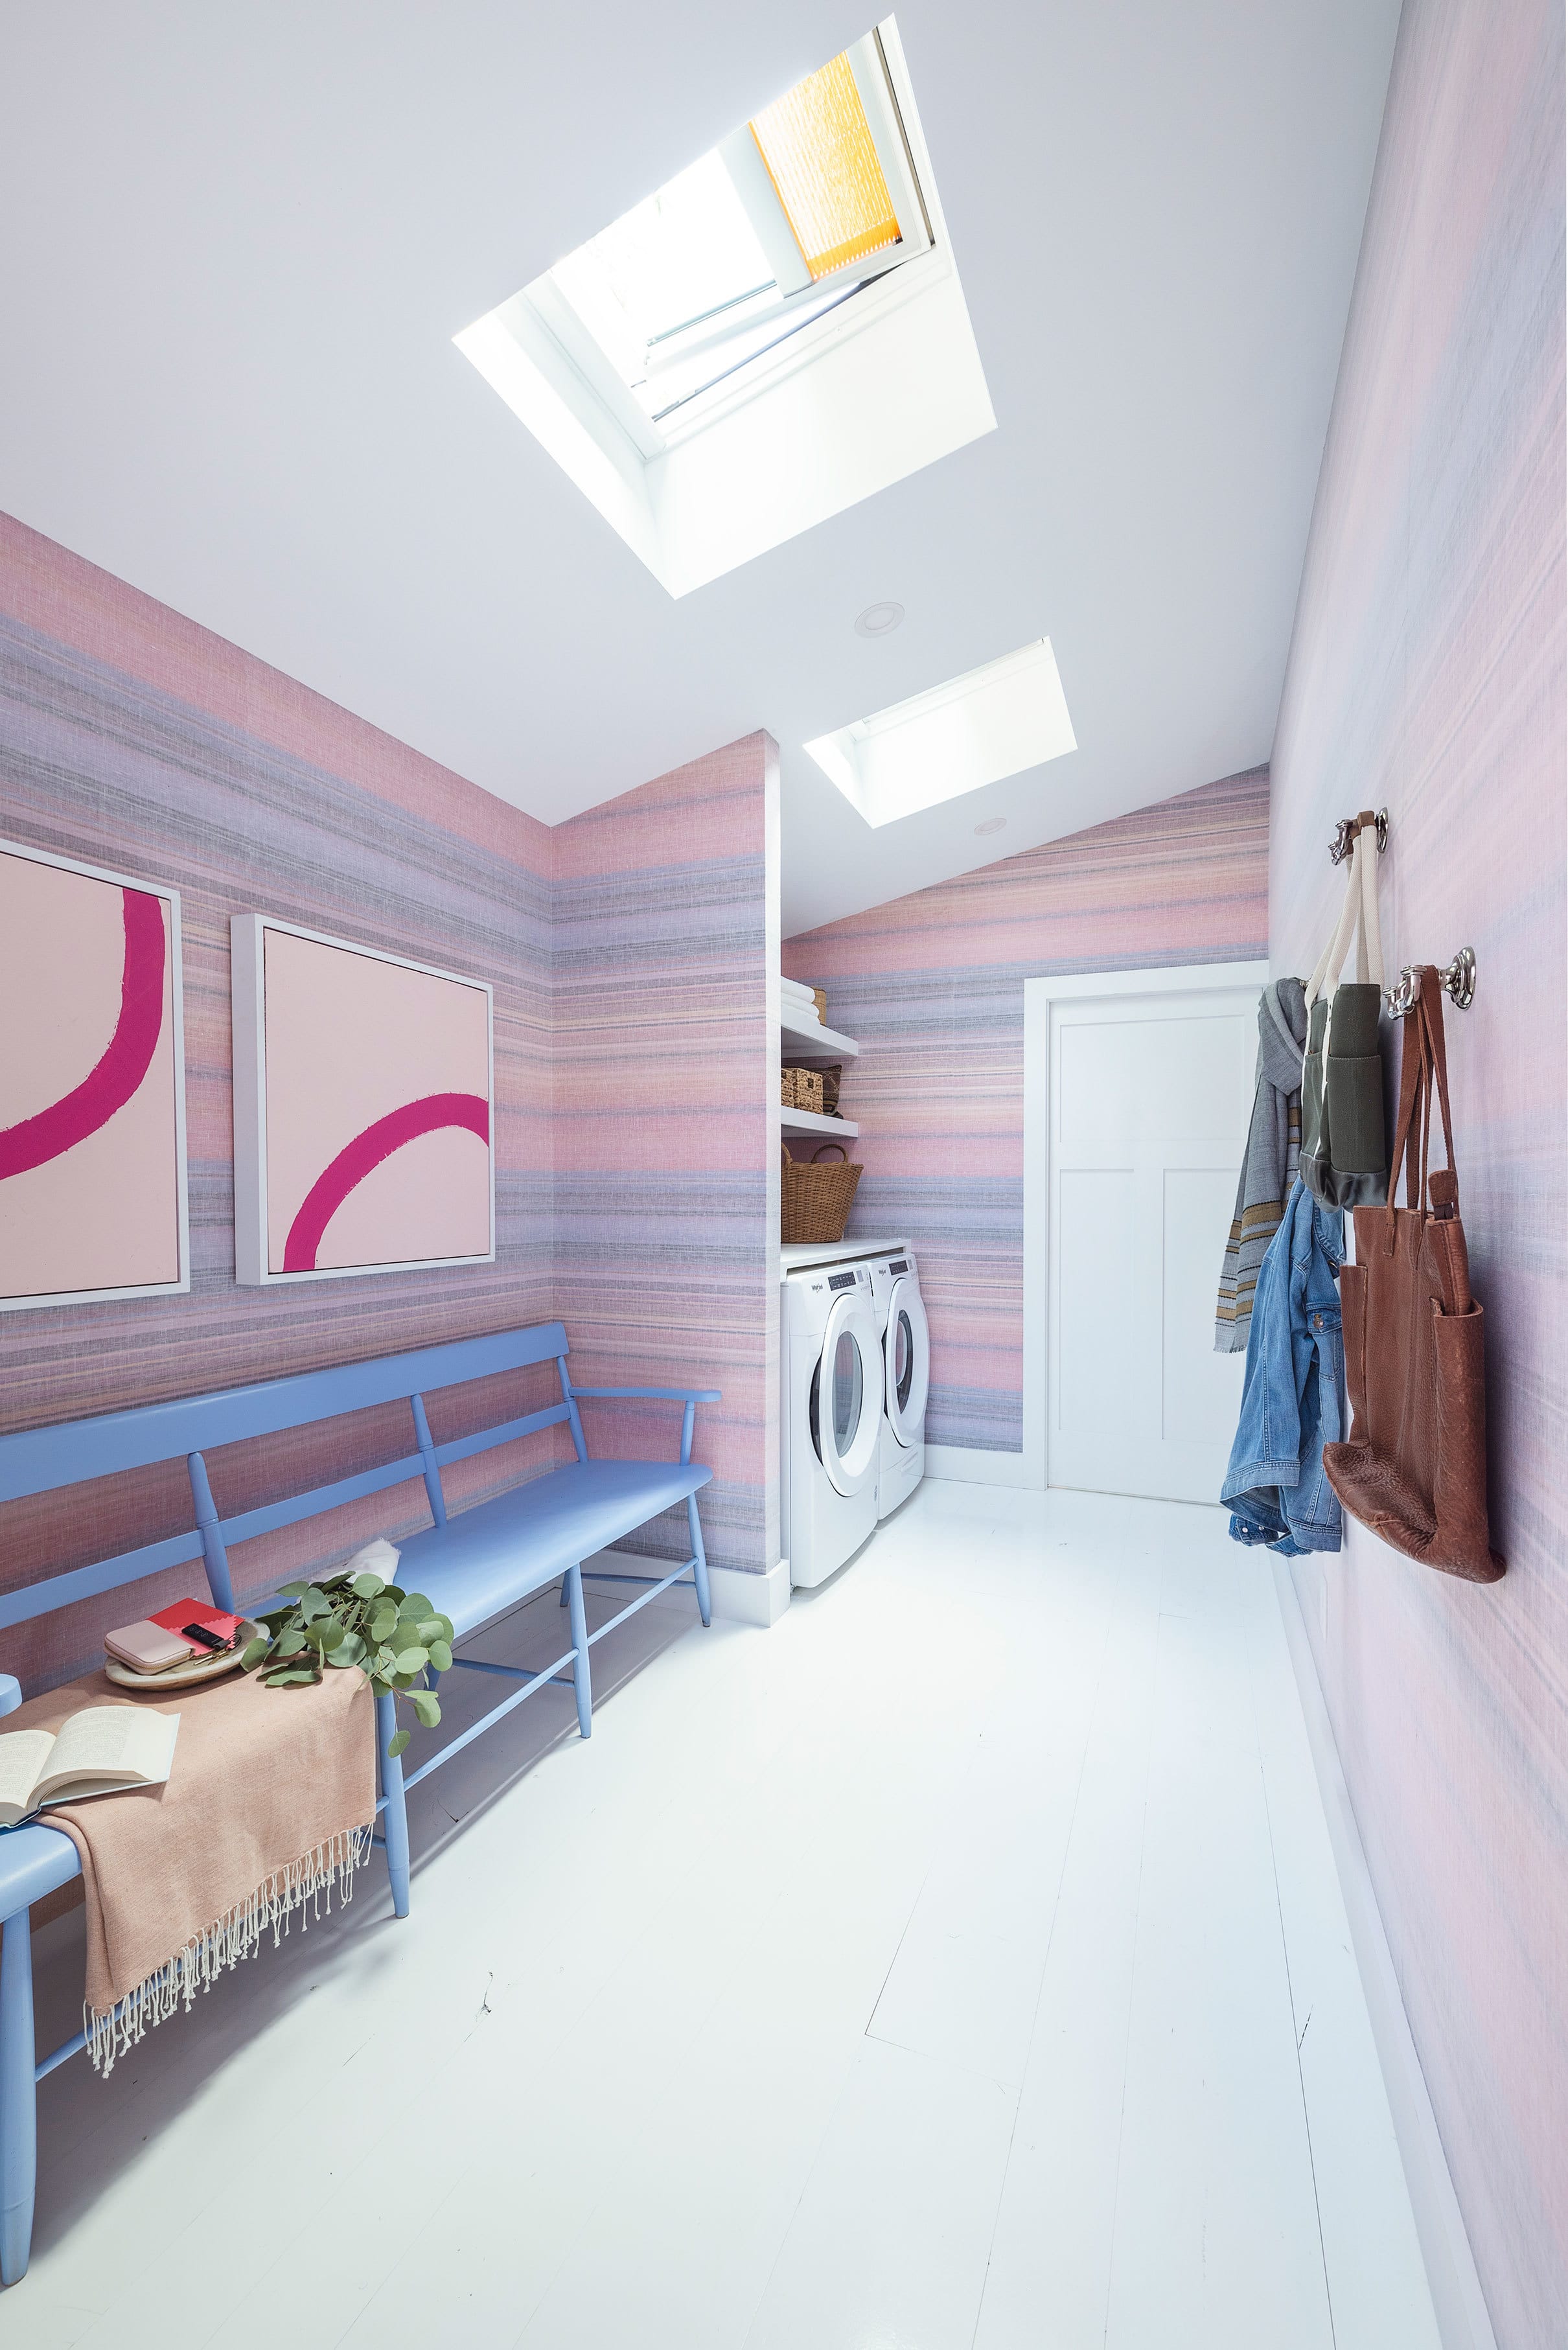 sunset inspired laundry room with two skylights